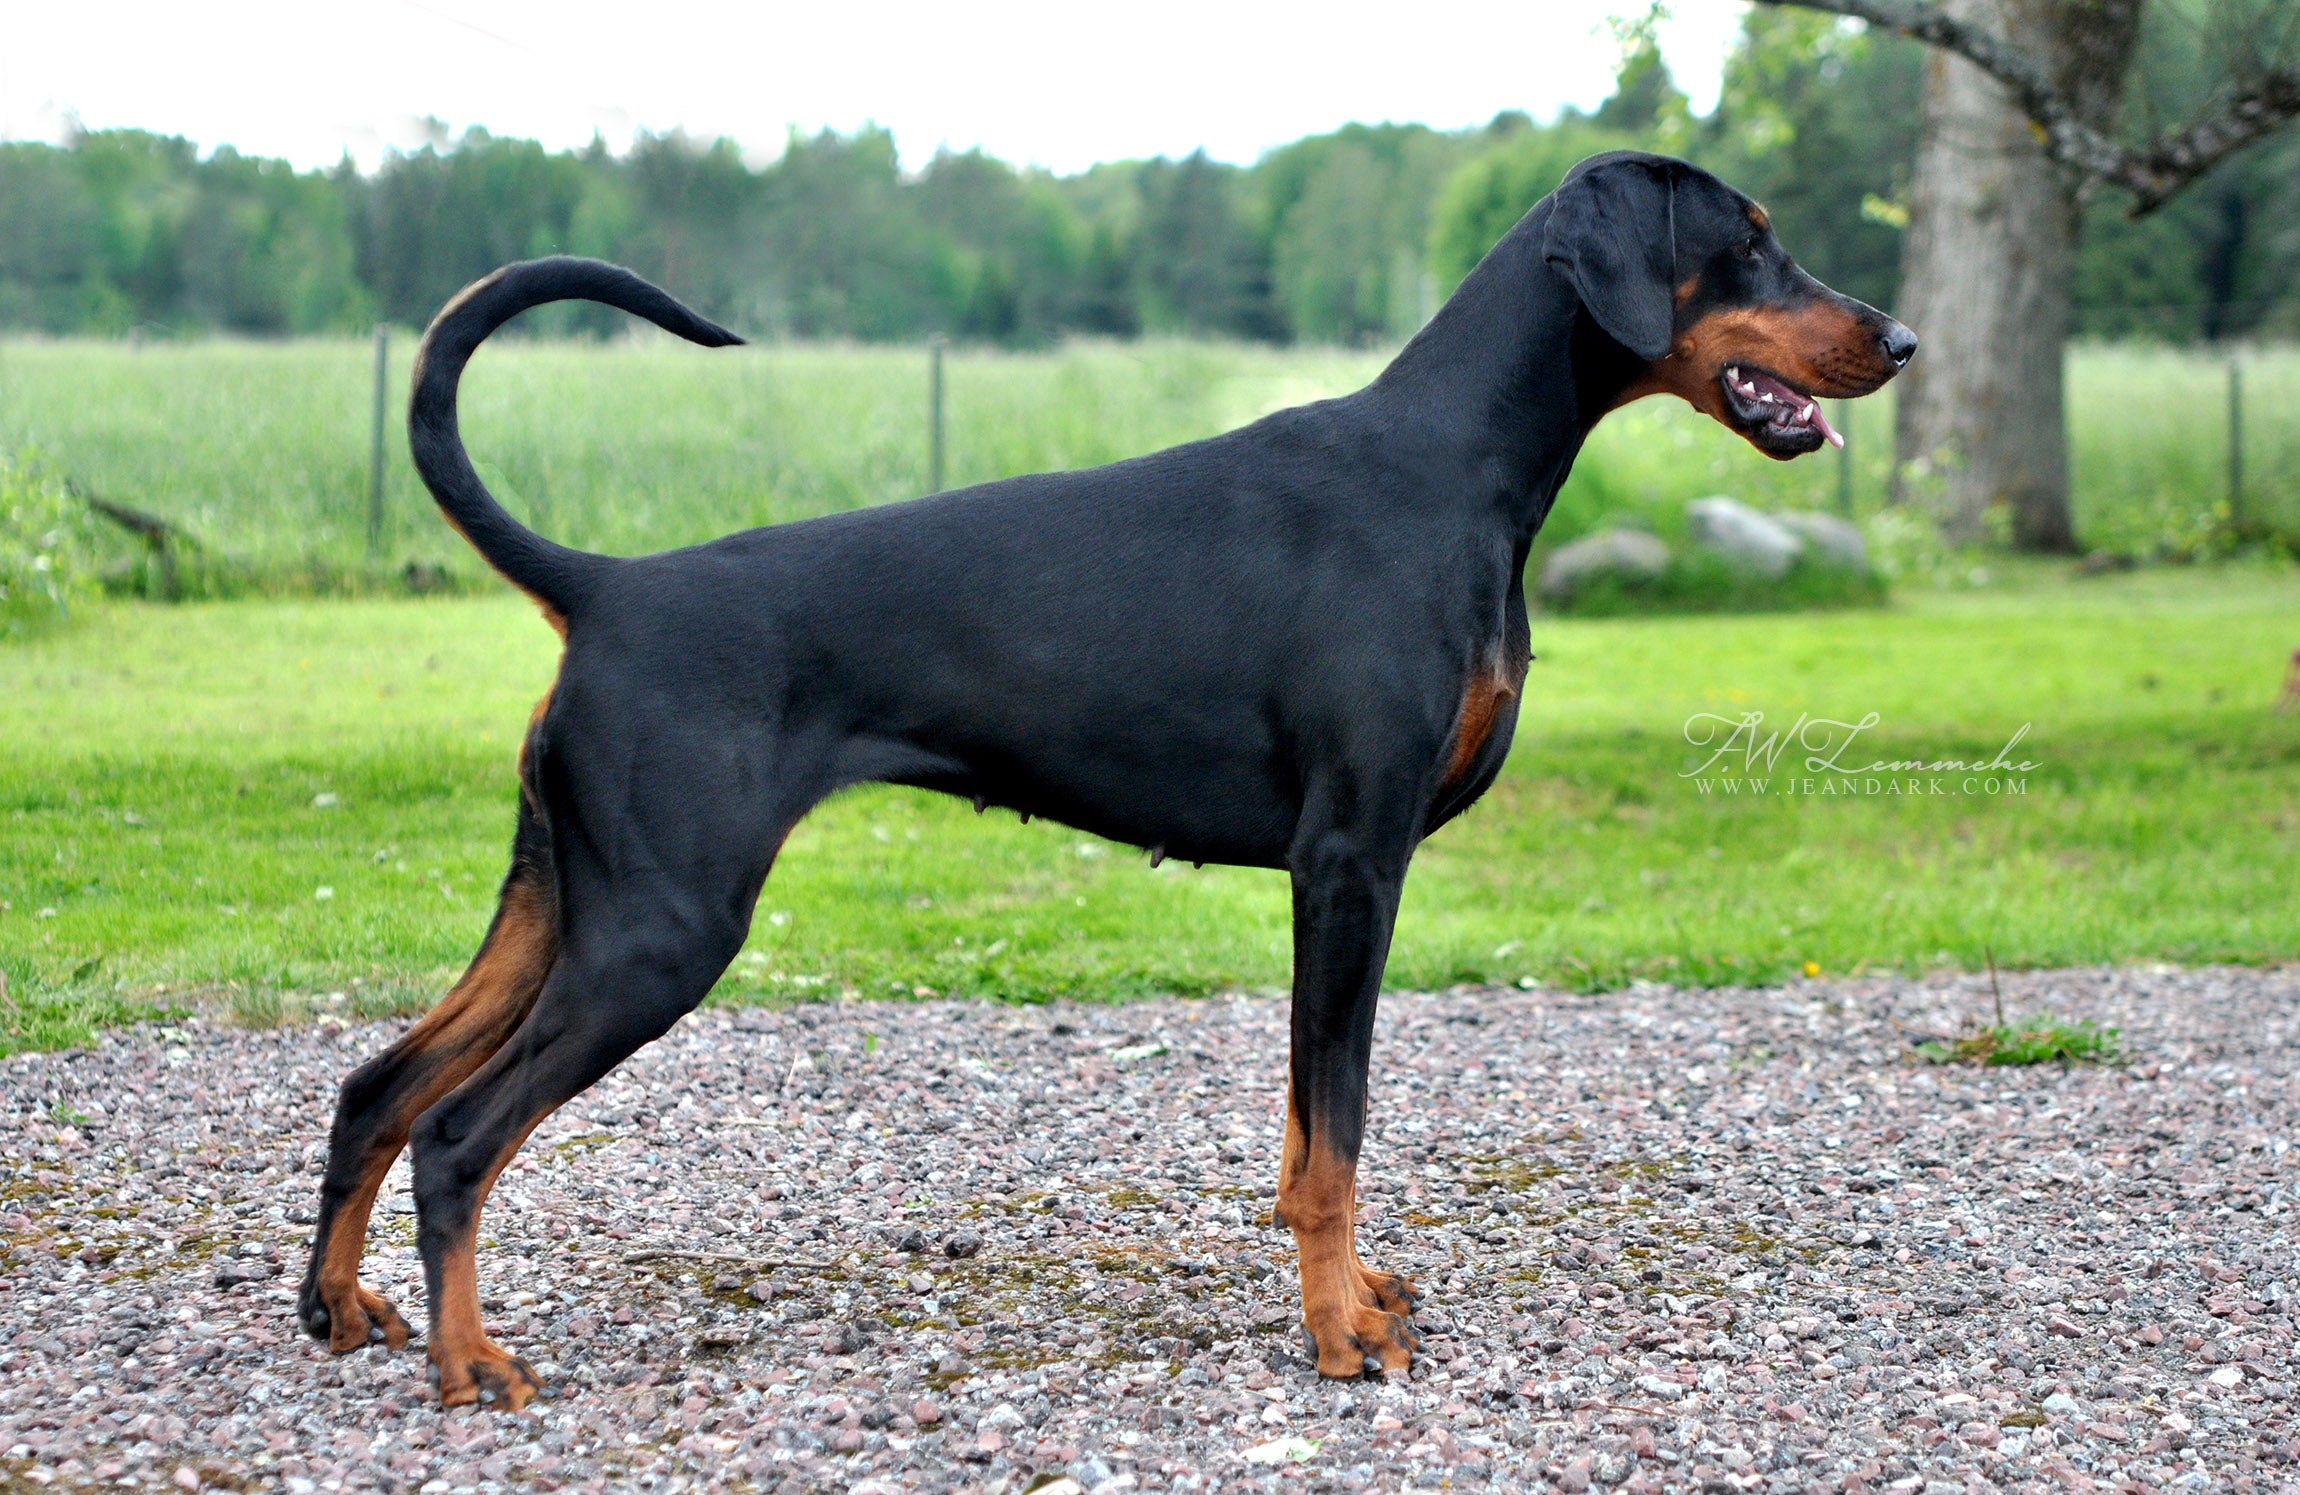 How Big Is A Doberman Pinscher : Dobermans are compactly built dogs